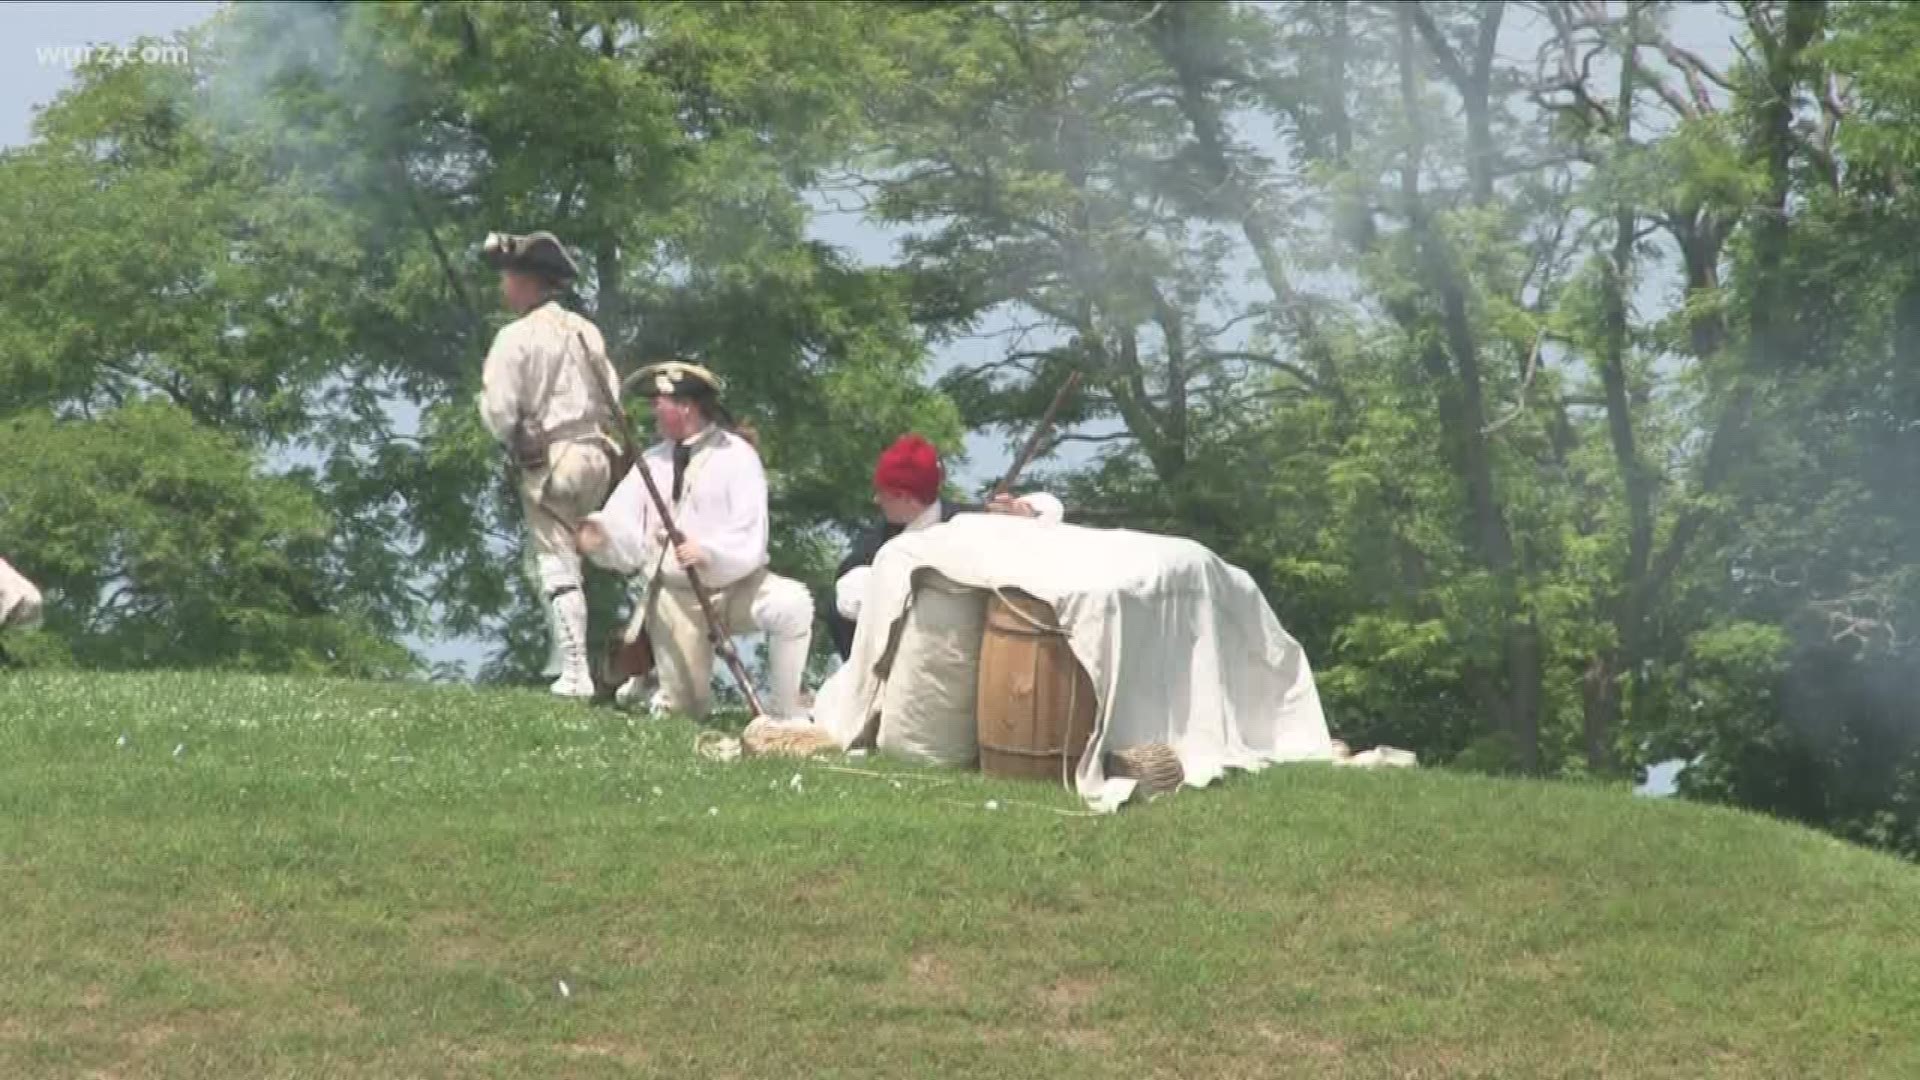 For 500 French and Indian War re-enactors at Old Fort Niagara... they didn't have that luxury.
And had to do battle in this heat.